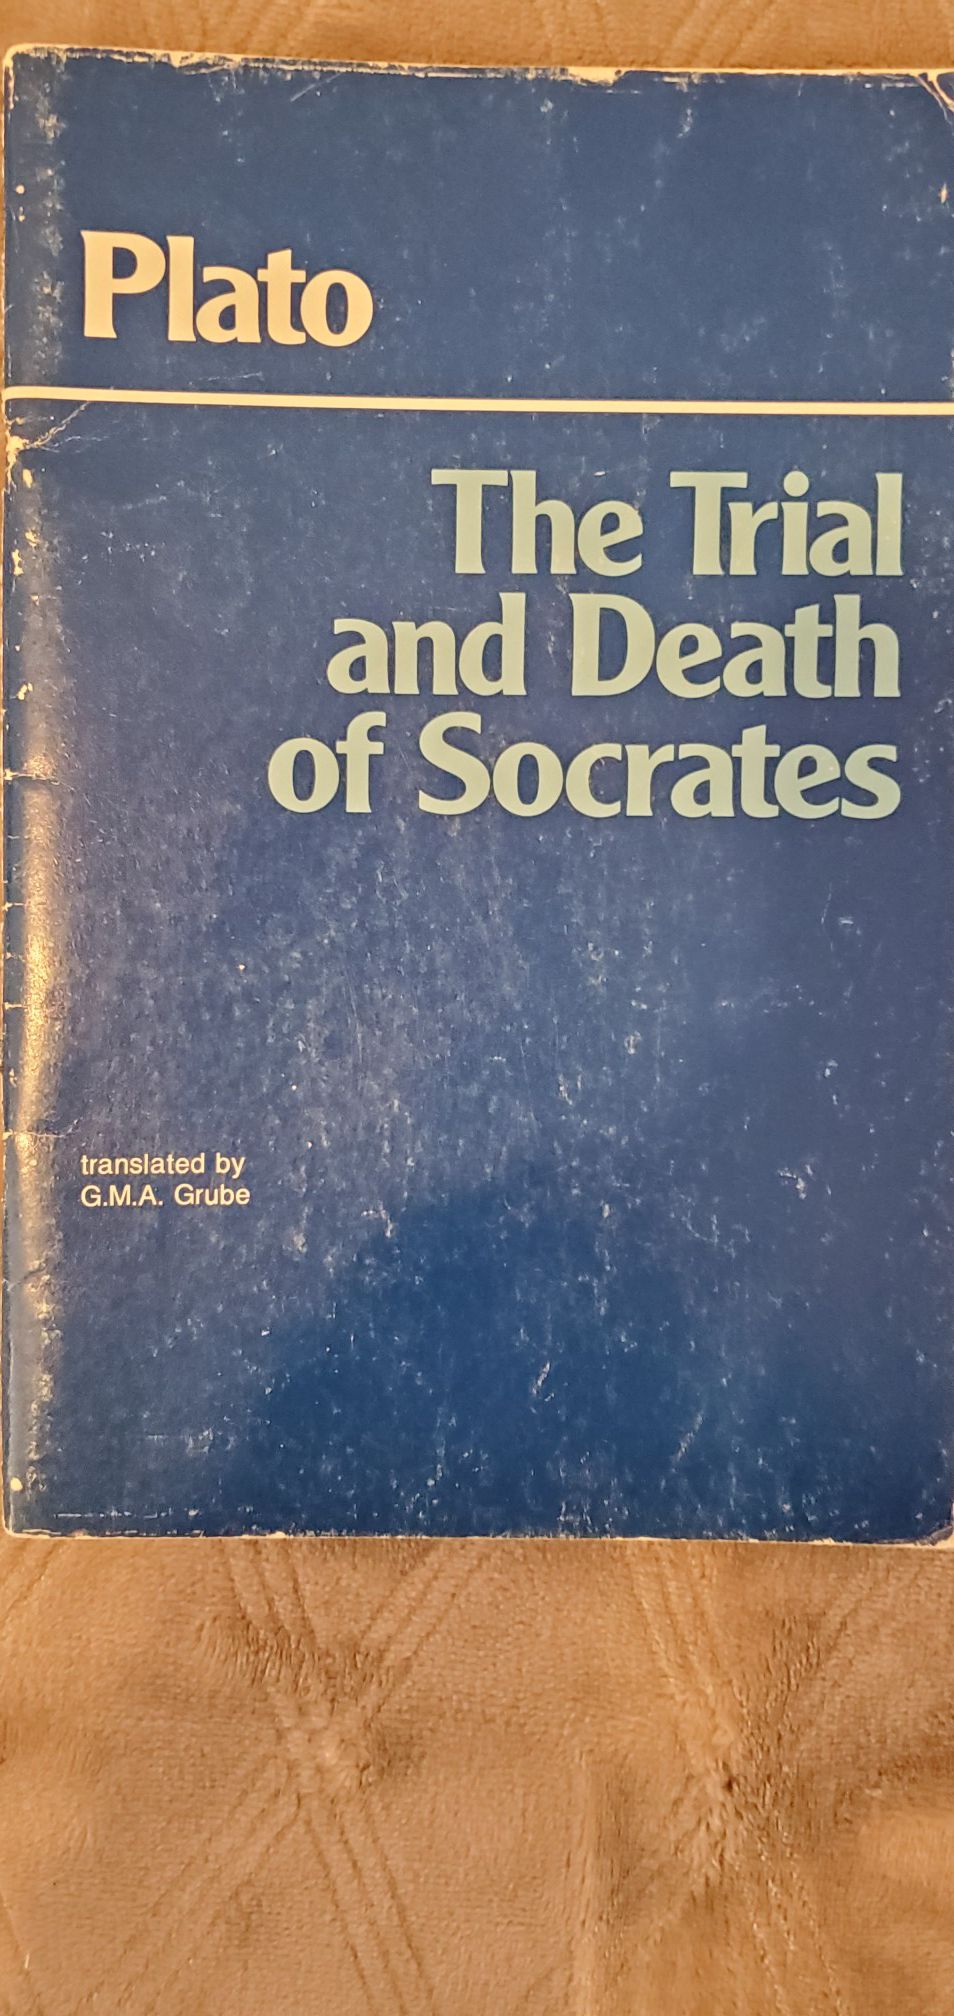 Plato The Trial and Death of Socrates